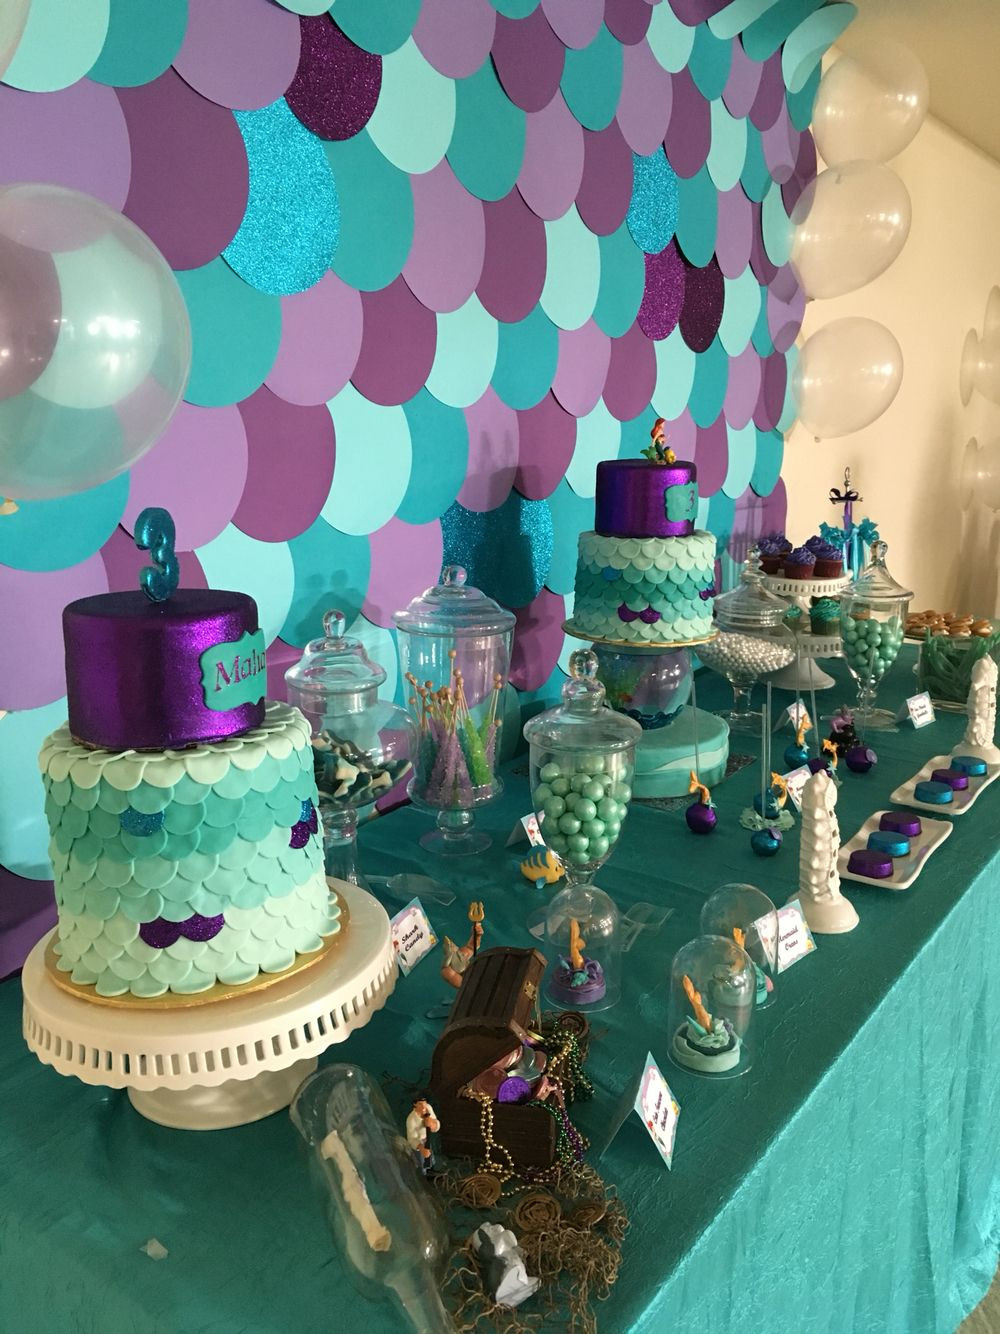 Baby Ariel Birthday Party
 Little Mermaid Party by Flo and Erica in 2019